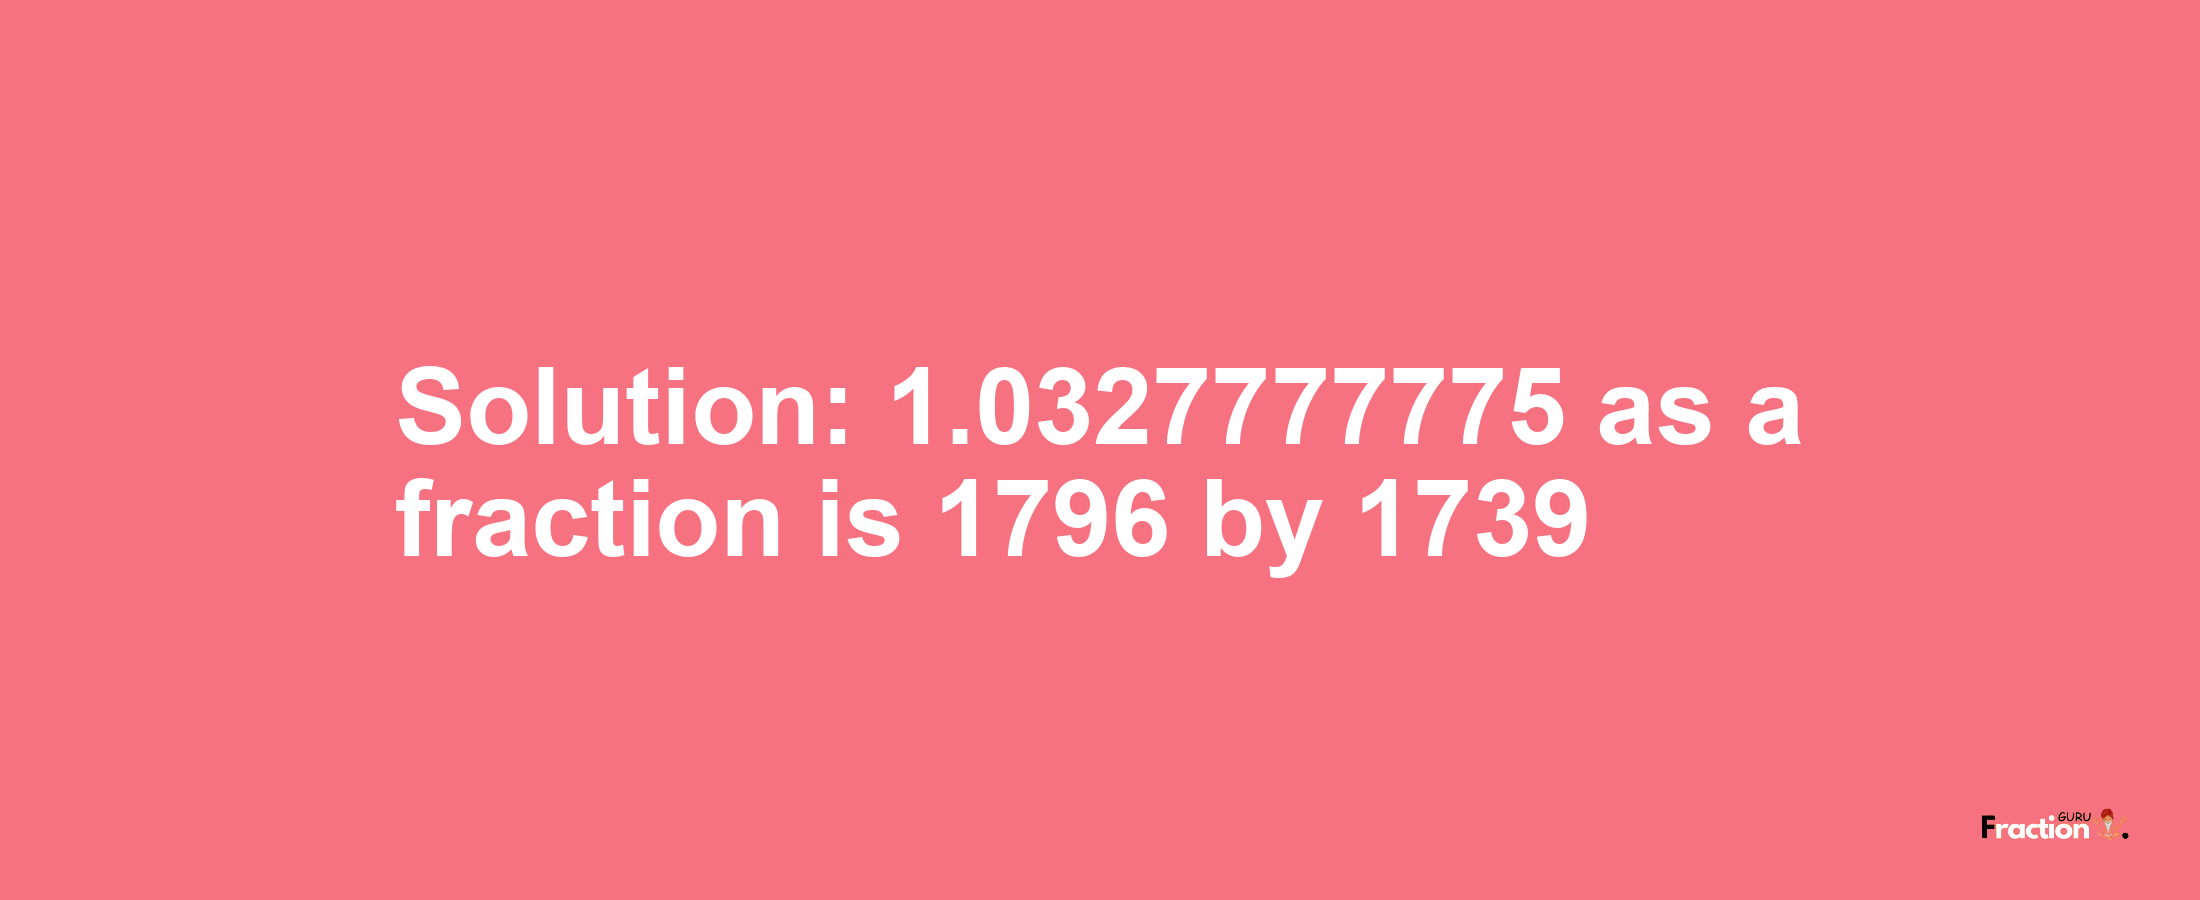 Solution:1.0327777775 as a fraction is 1796/1739